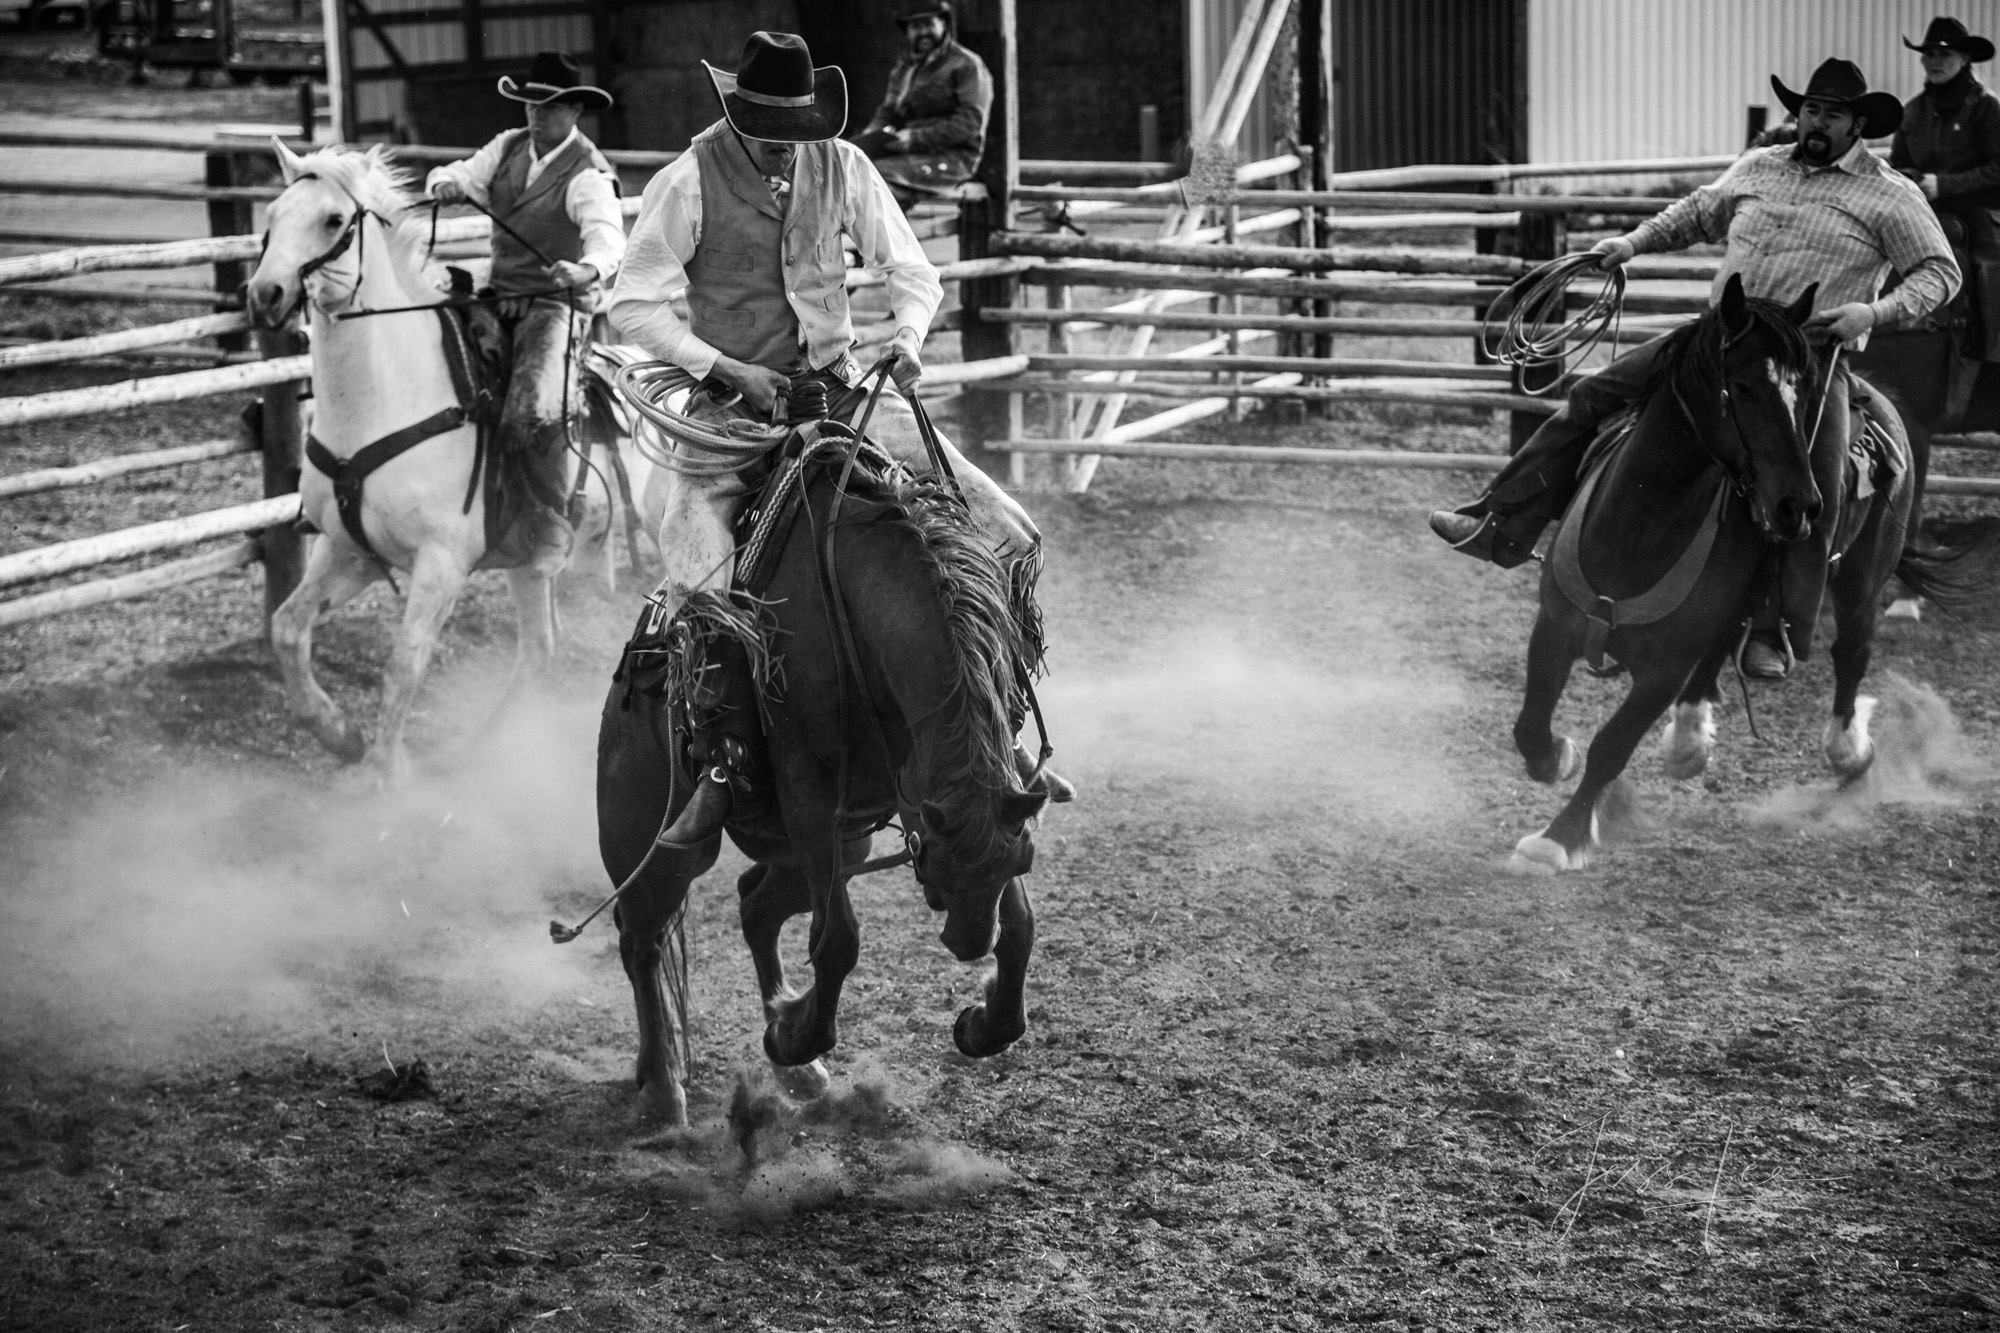 Fine Art Limited Edition Photo Prints of Cowboys, Horses, and life in the West.  Cowboy pictures in black and white. Head up!...